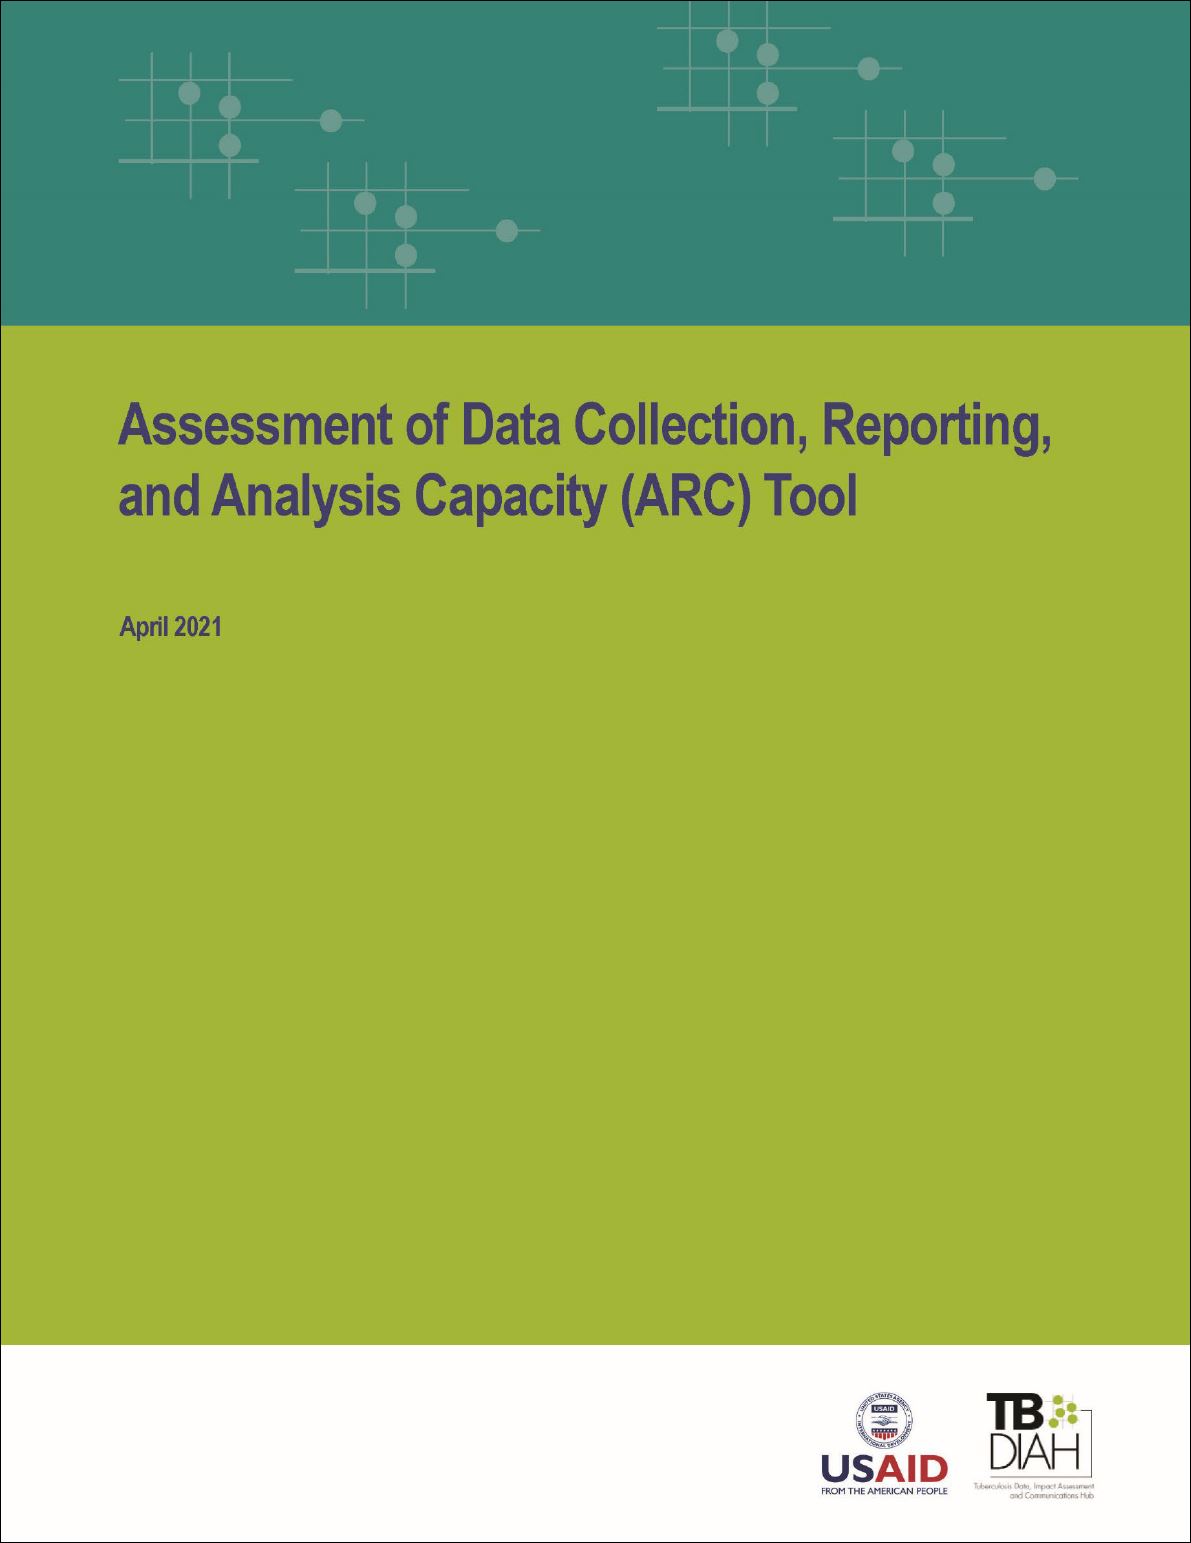 Assessment of Data Collection, Reporting, and Analysis Capacity (ARC) Tool